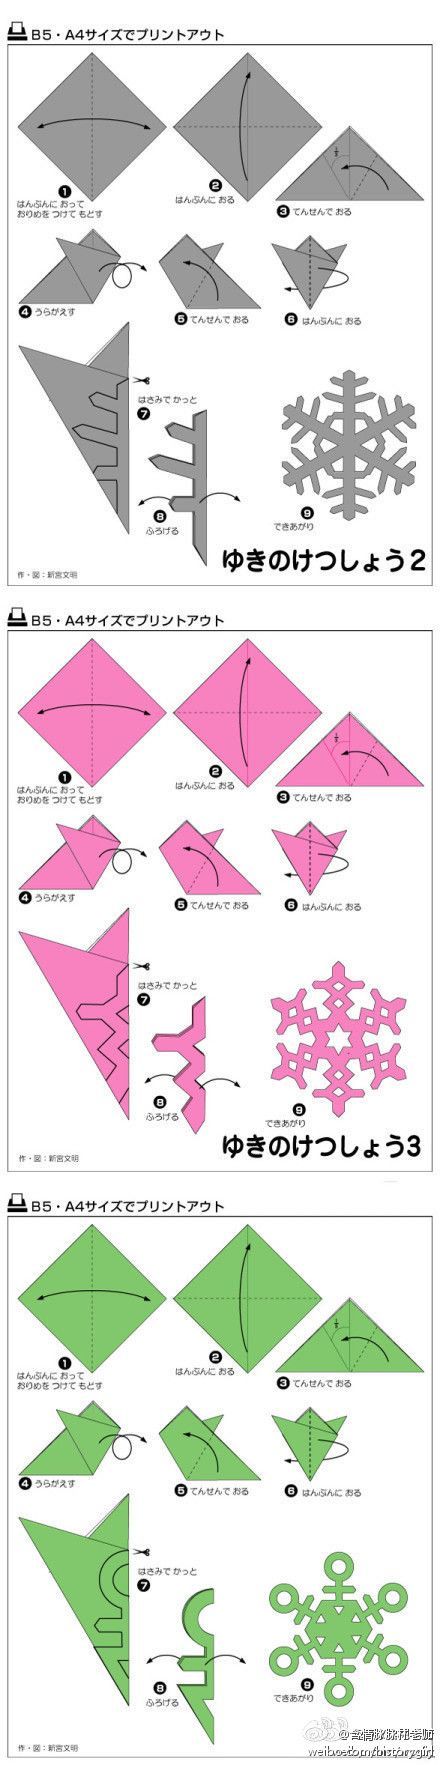 snowflakes instructions